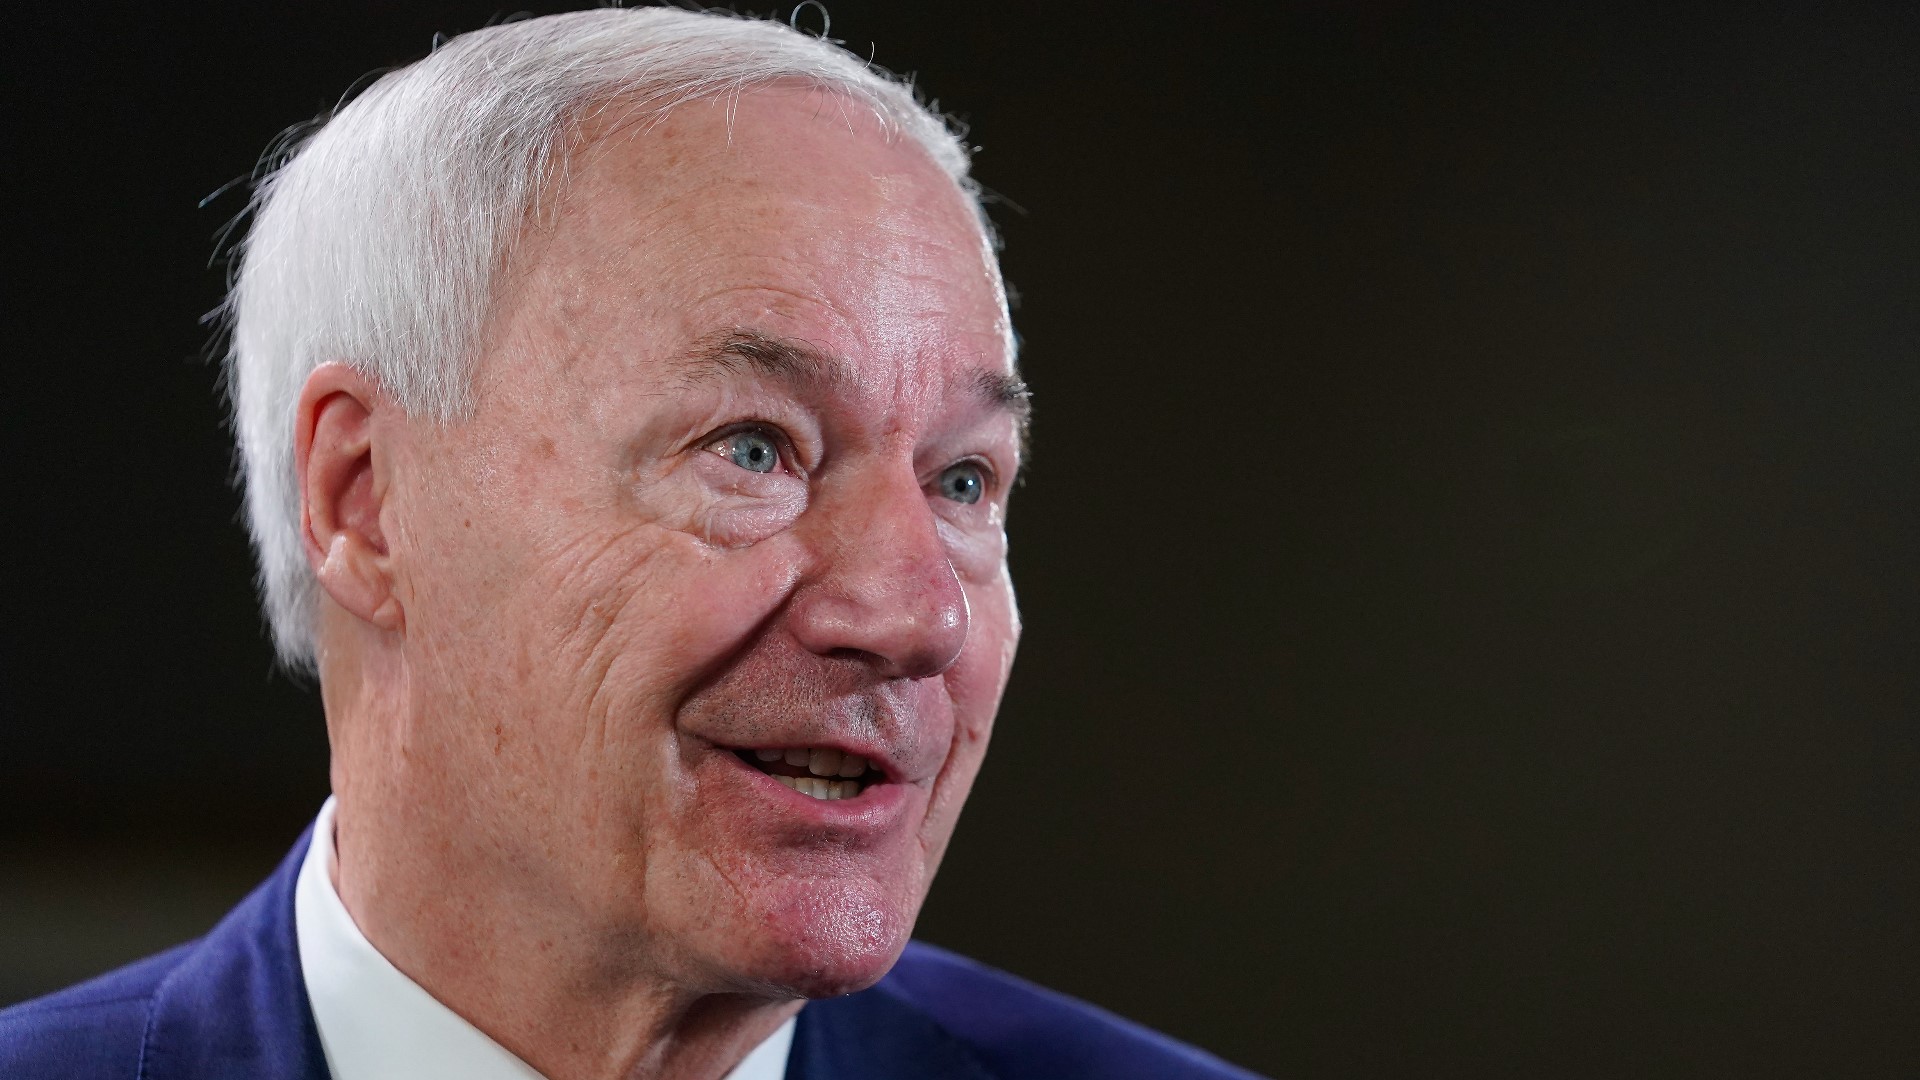 Former Arkansas Gov. Asa Hutchinson is running for president in 2024. What are his priorities as a GOP candidate?